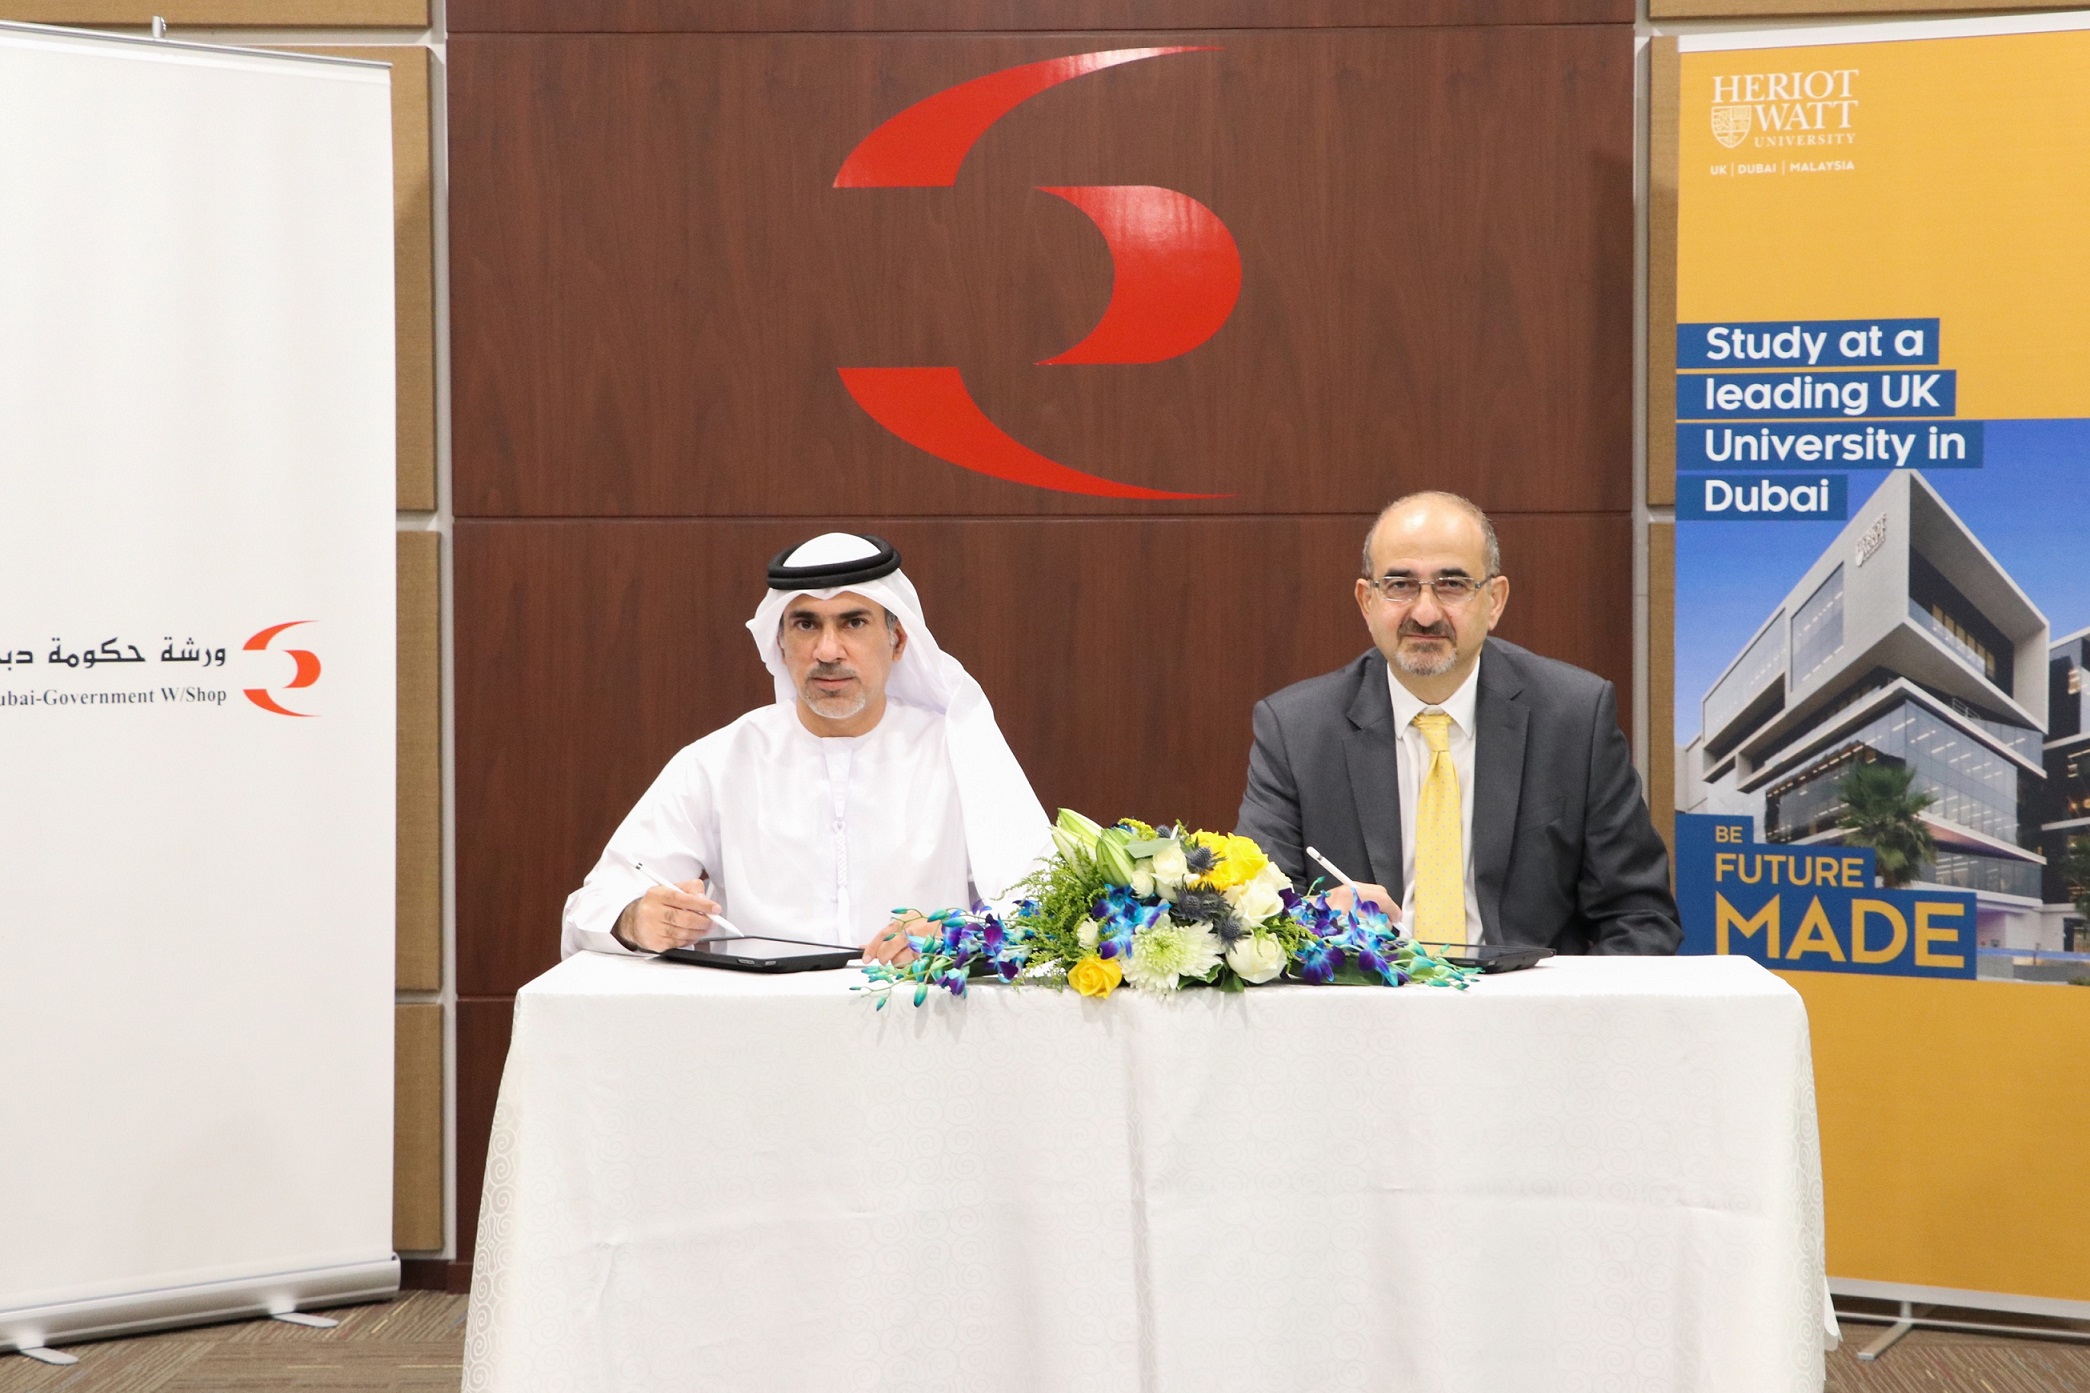 DGW signs MoU with Heriot-Watt University Dubai to enhance cooperation in fields of education, training and research